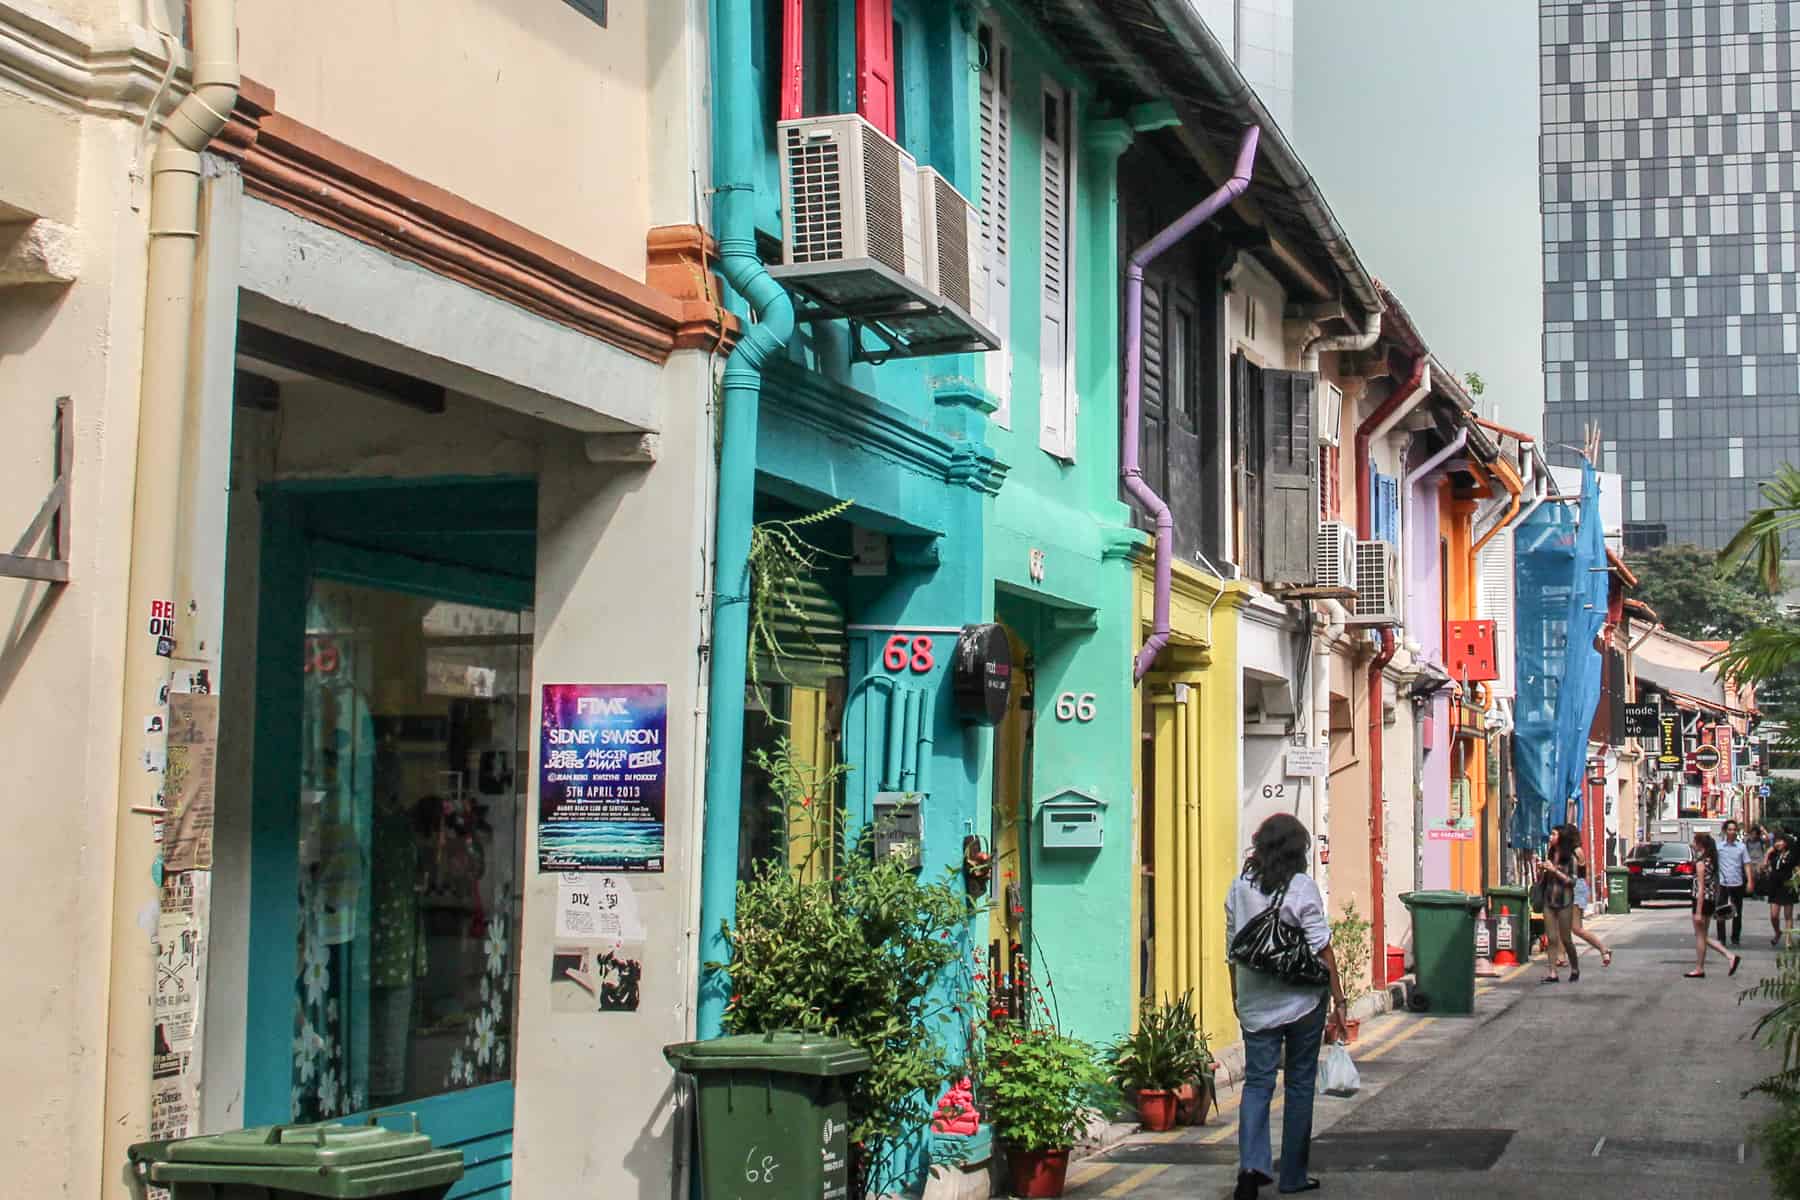 A woman walks past the mint green, yellow and orange shop colours on Haji Lane in Singapore that sit low in comparison to the tower block at the end of the street